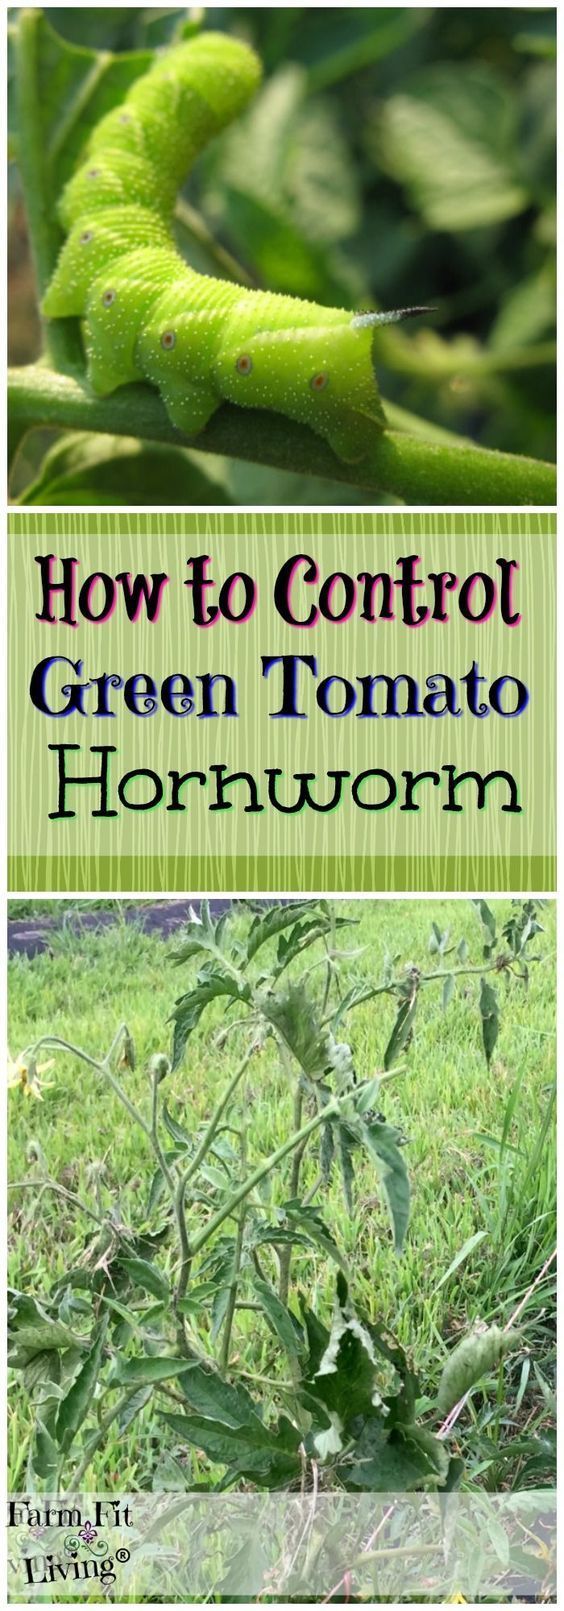 How to control green tomato hornworm | Garden Insects | Vegetable Gardening | Tomato Gardens